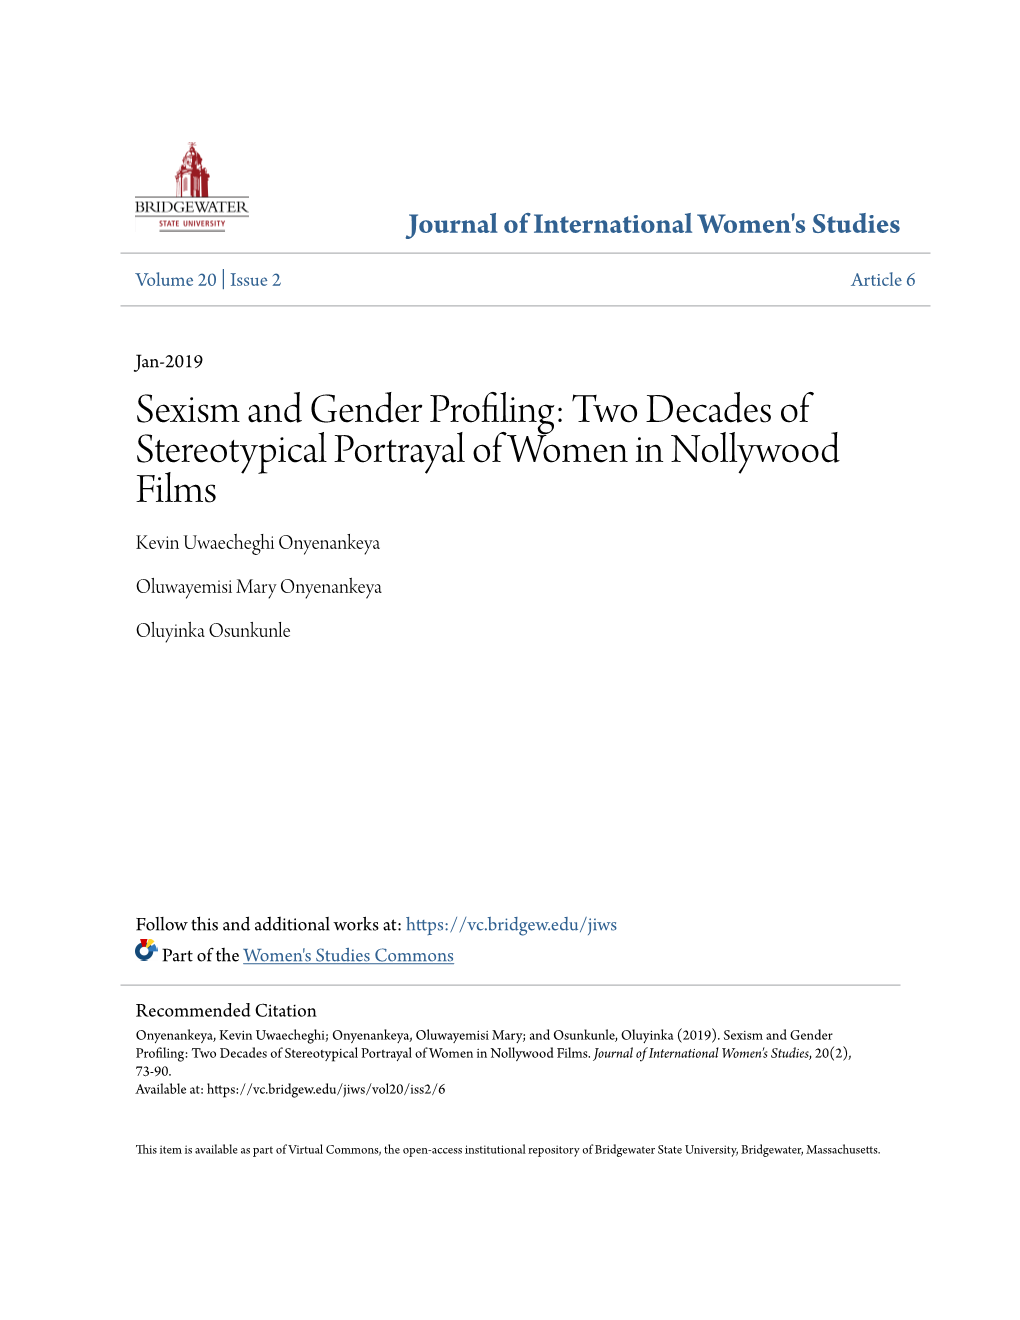 Sexism and Gender Profiling: Two Decades of Stereotypical Portrayal of Women in Nollywood Films Kevin Uwaecheghi Onyenankeya